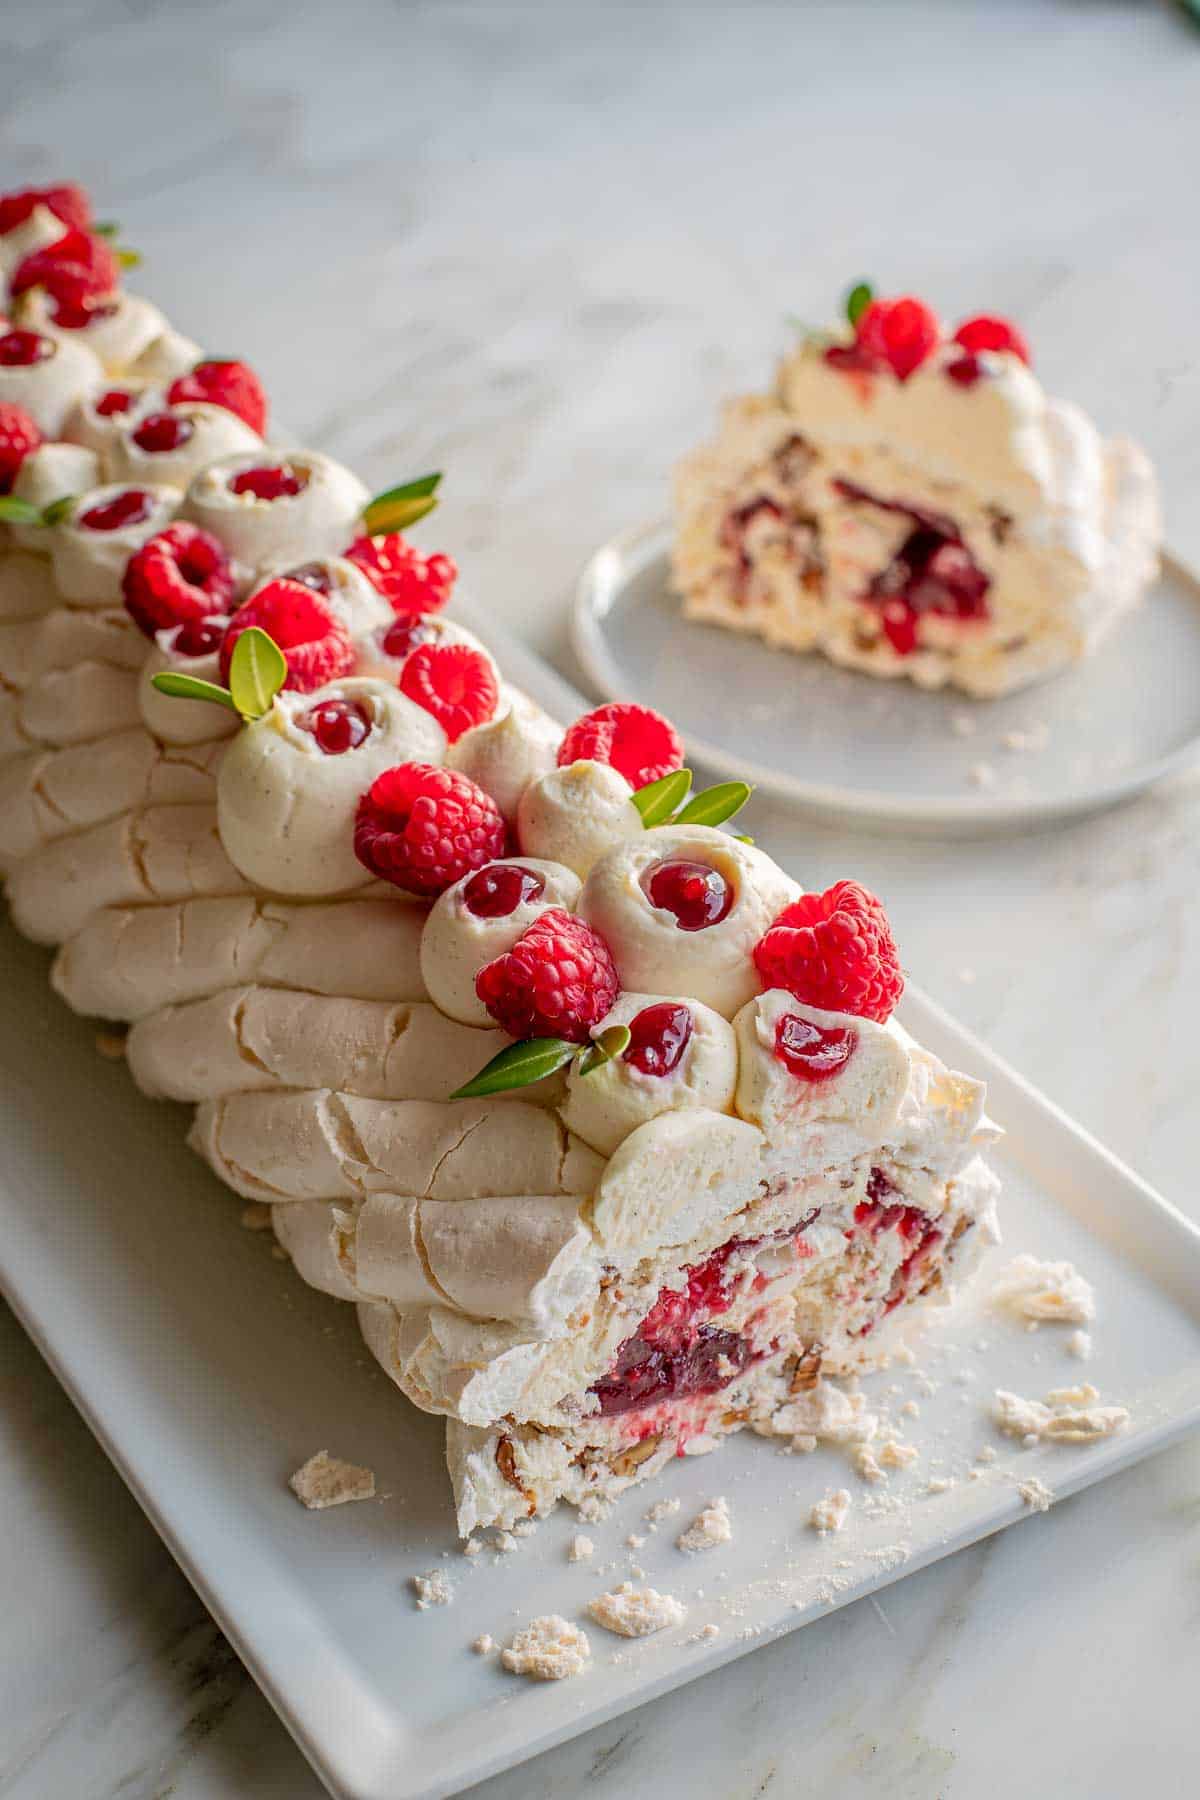 Top view of the meringue roulade with a slice of the meringue roulade in the background.